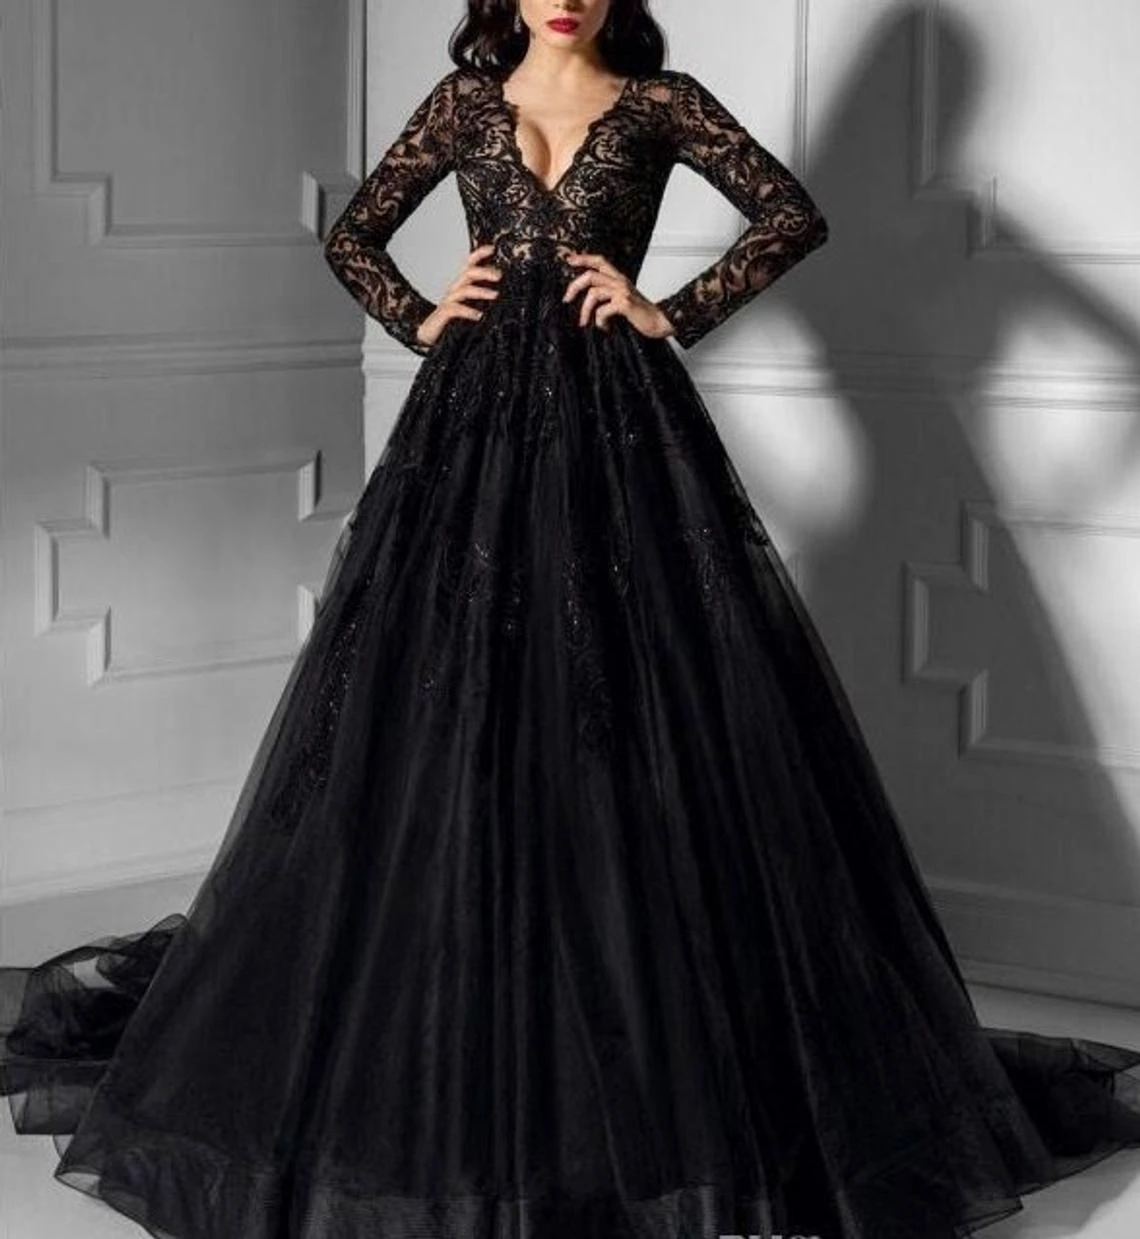 Black Tulle Lace Bridal Gown Princess Simple Feminine V-Neck Cut-Out Long Sleeves Sequins Pure Color Party Dresses Plus Size dinner gown